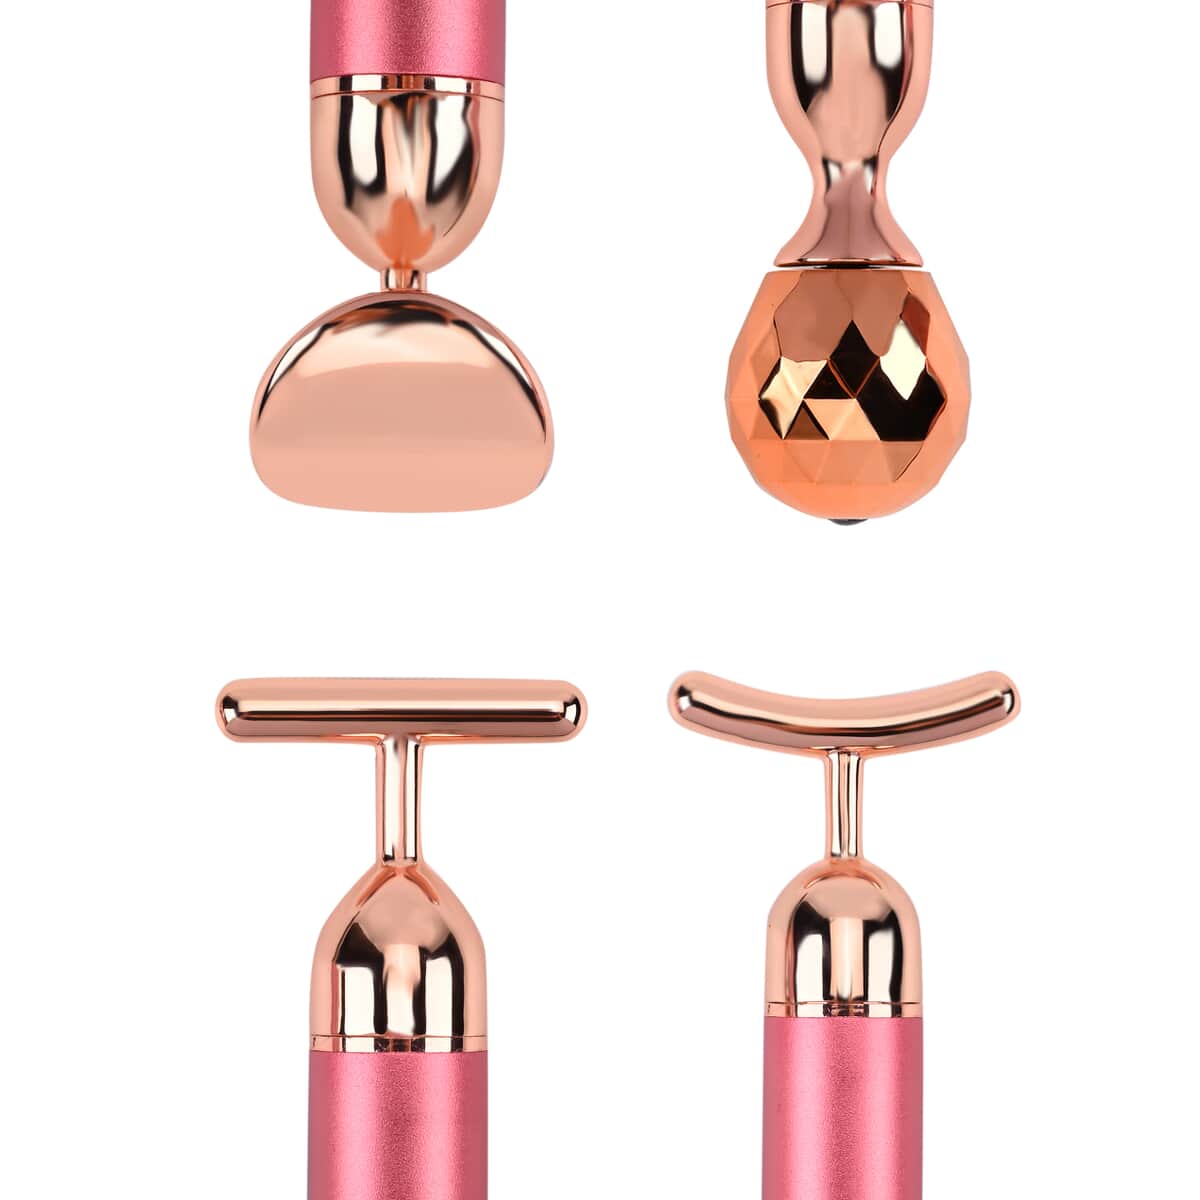 4-in-1 Face Massager Rollers with Four Interchangeable Massage Heads - Rose Gold (5.9"x1.49"), 1xAA Battery Not Including image number 6